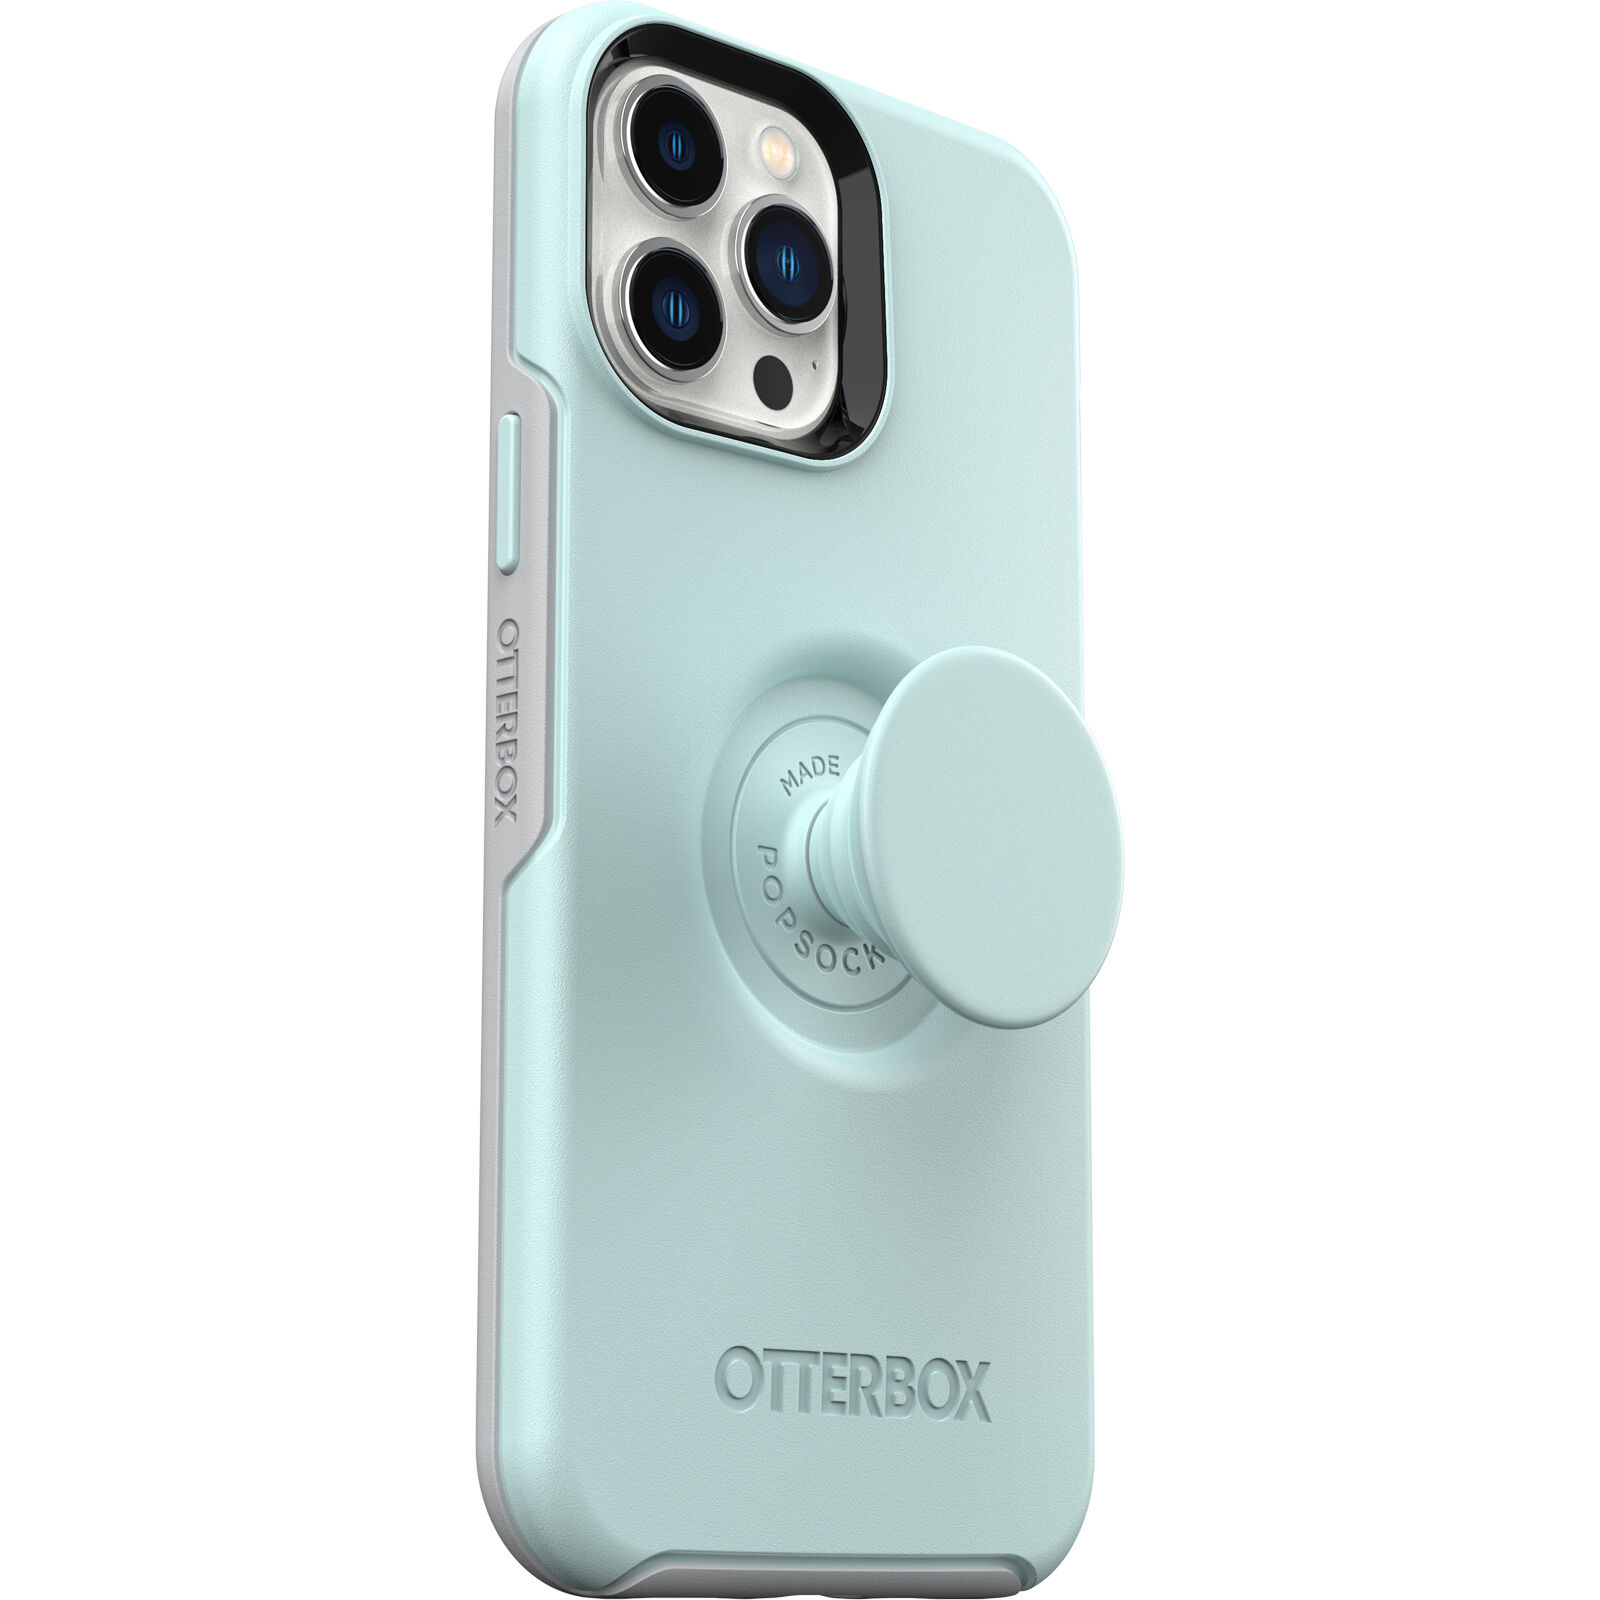 iPhone 12 Pro Max cases from OtterBox